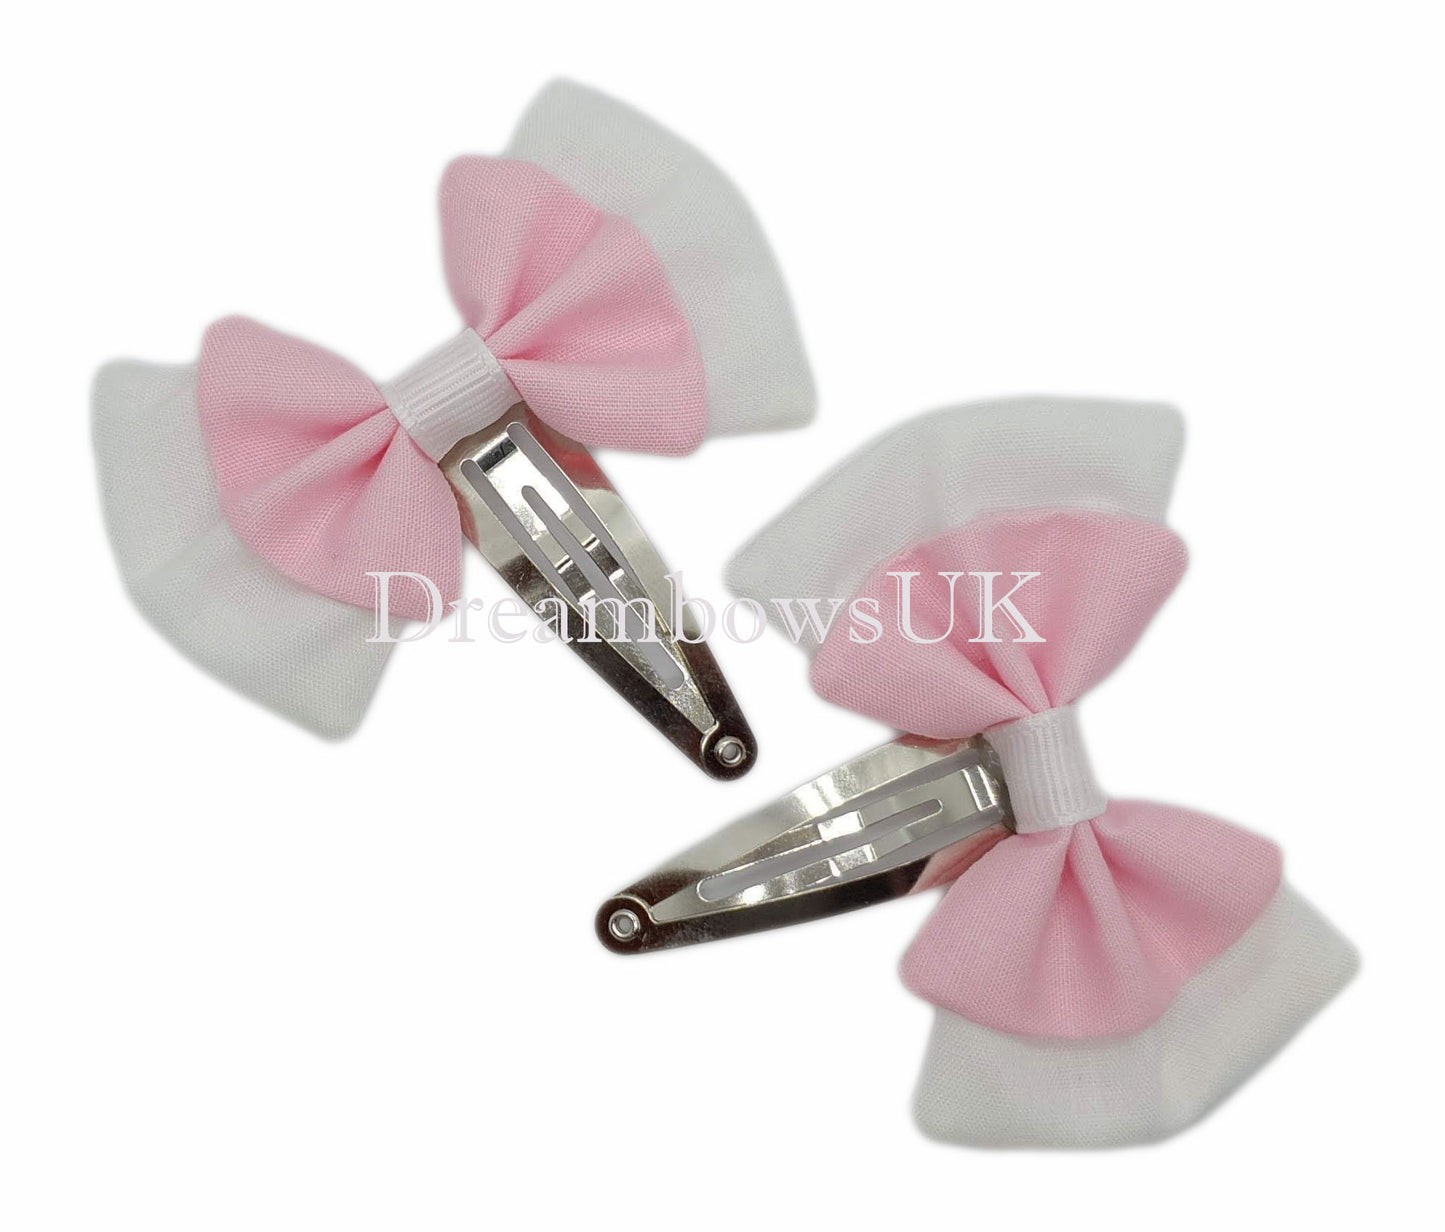 2x Baby pink and white fabric hair bows